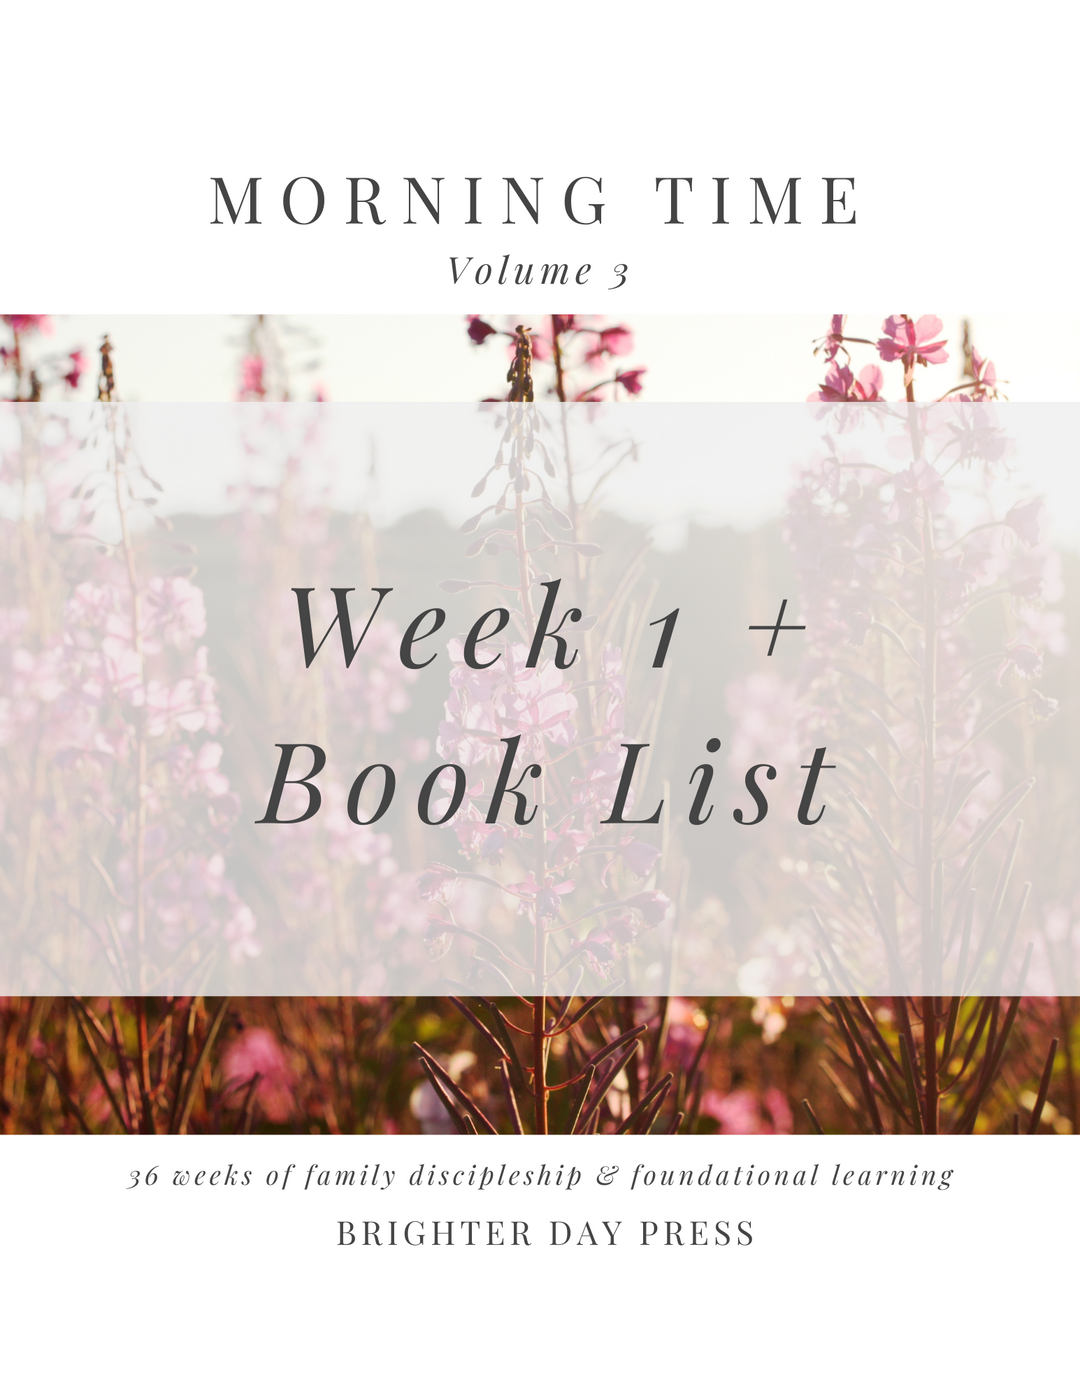 Morning Time, Vol. 3 - Week 1 + Book List (Free Download)